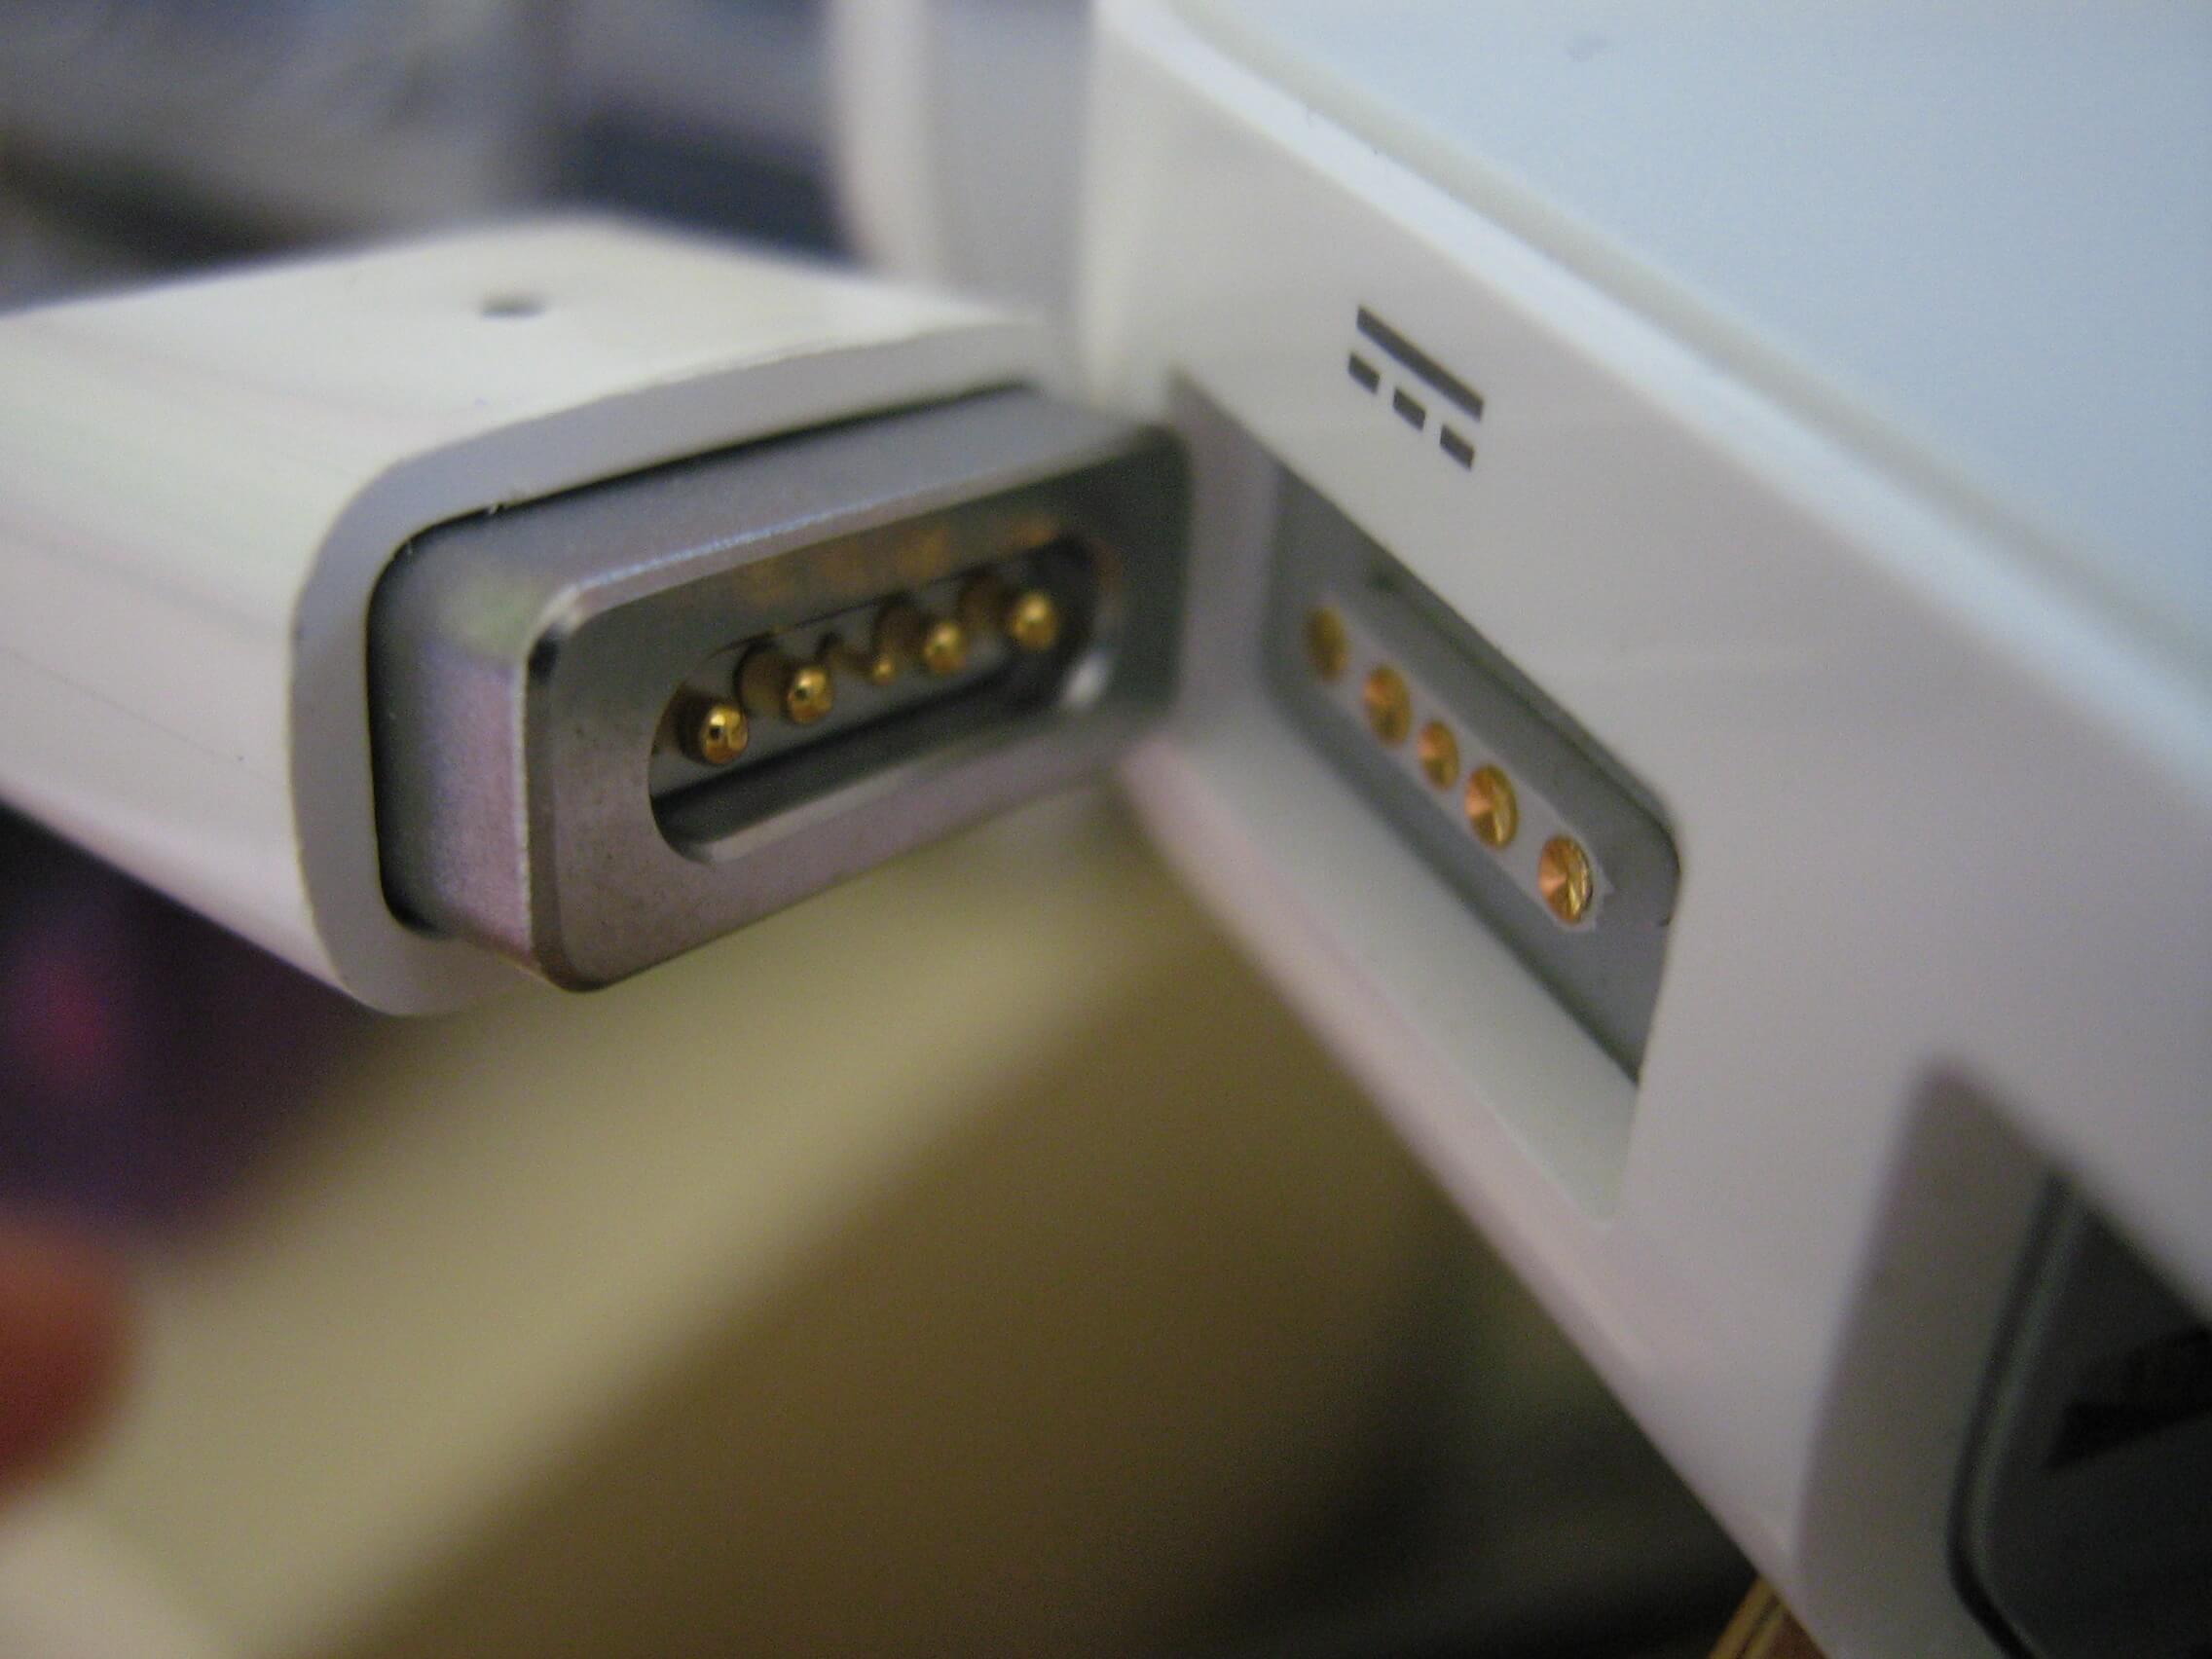 An Apple Mac charging cable, known as Magsafe.